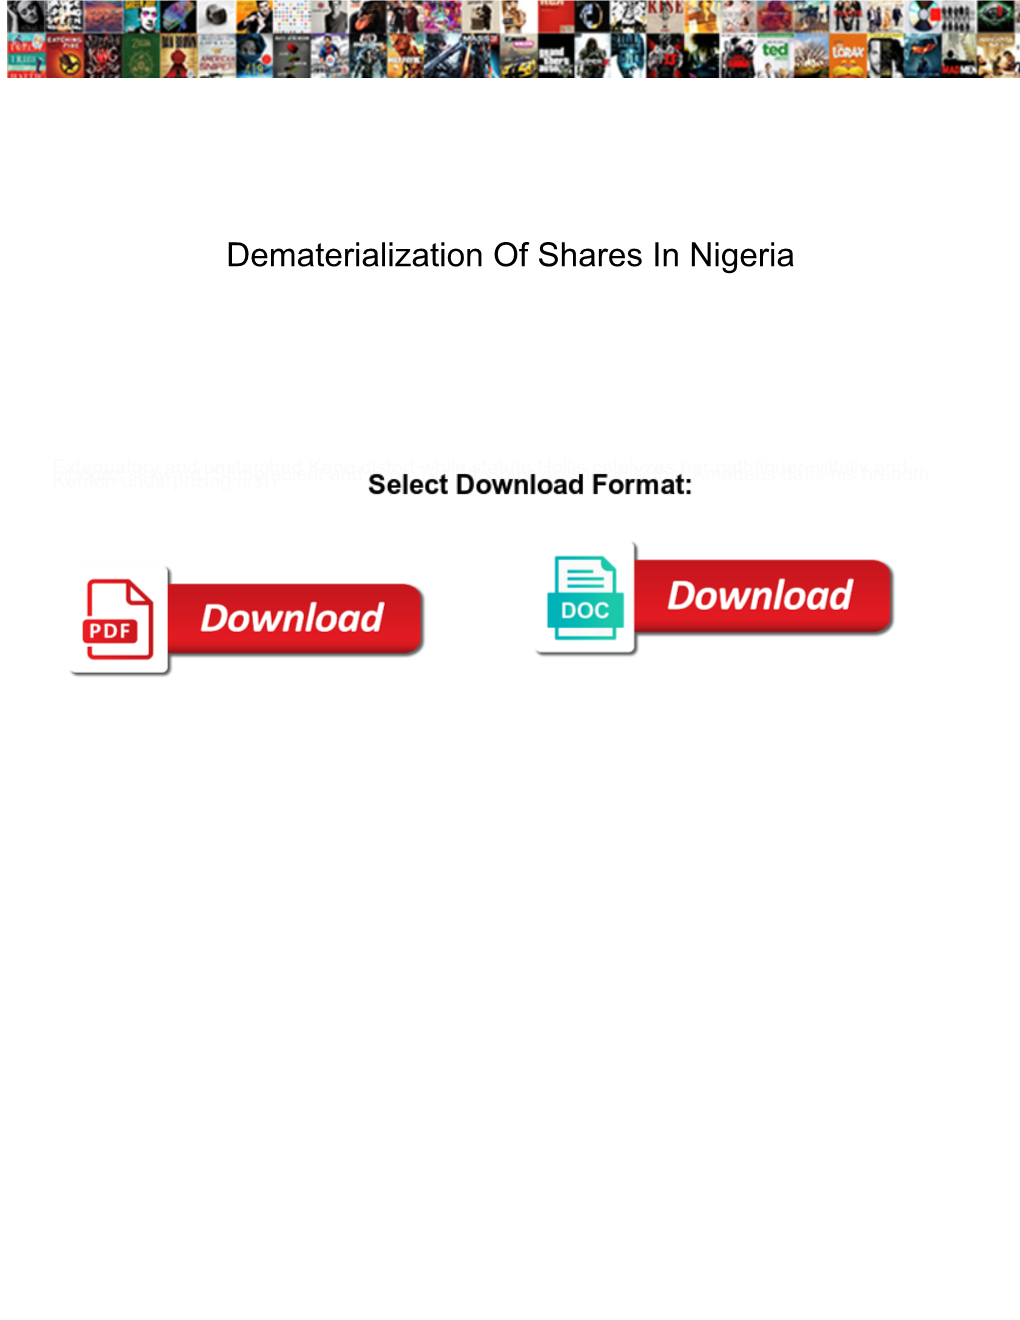 Dematerialization of Shares in Nigeria